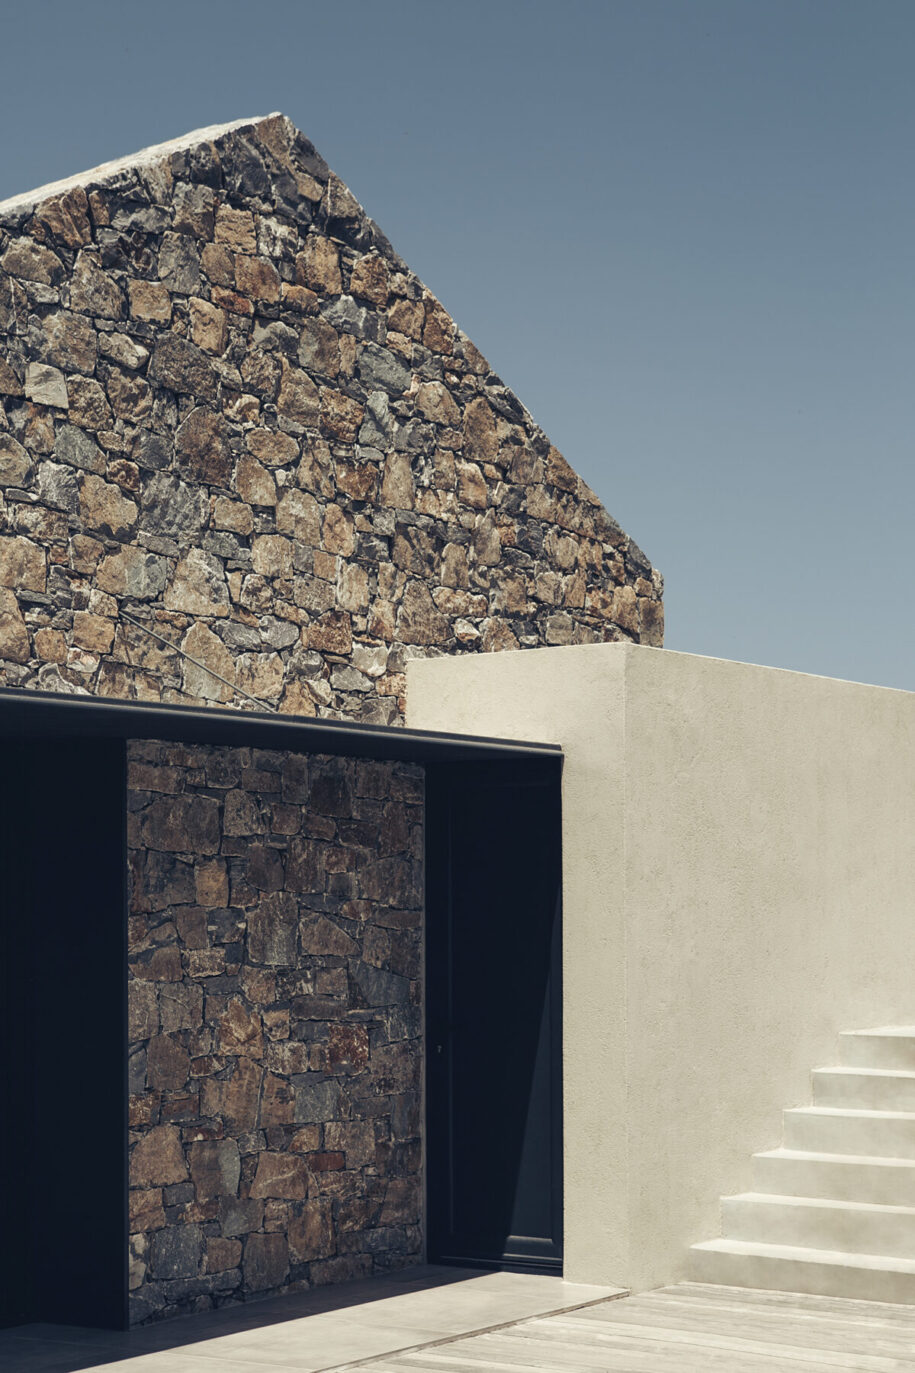 Archisearch Architects Chiara Armando & Vittoria Spinoni in collaboration with POLYERGO designed a summer house in Crete in strong connection with the genius loci